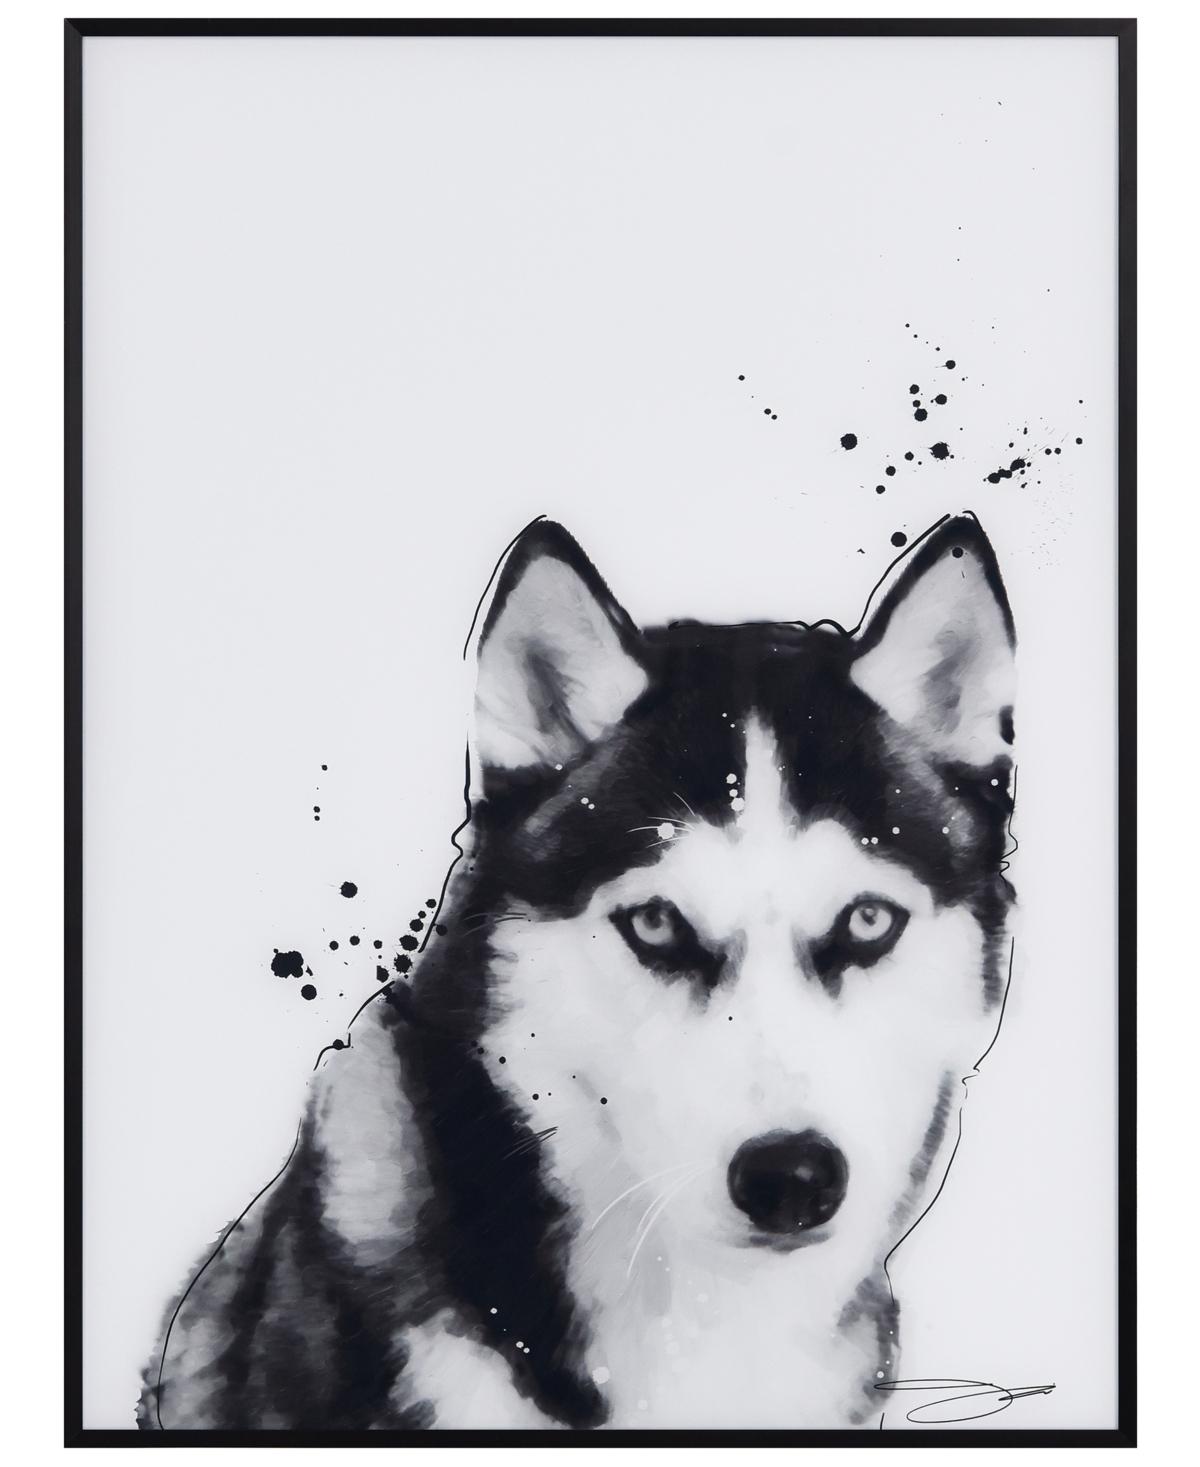 Empire Art Direct "siberian Husky" Pet Paintings On Printed Glass Encased With A Black Anodized Frame, 24" X 18" X 1" In Black And White